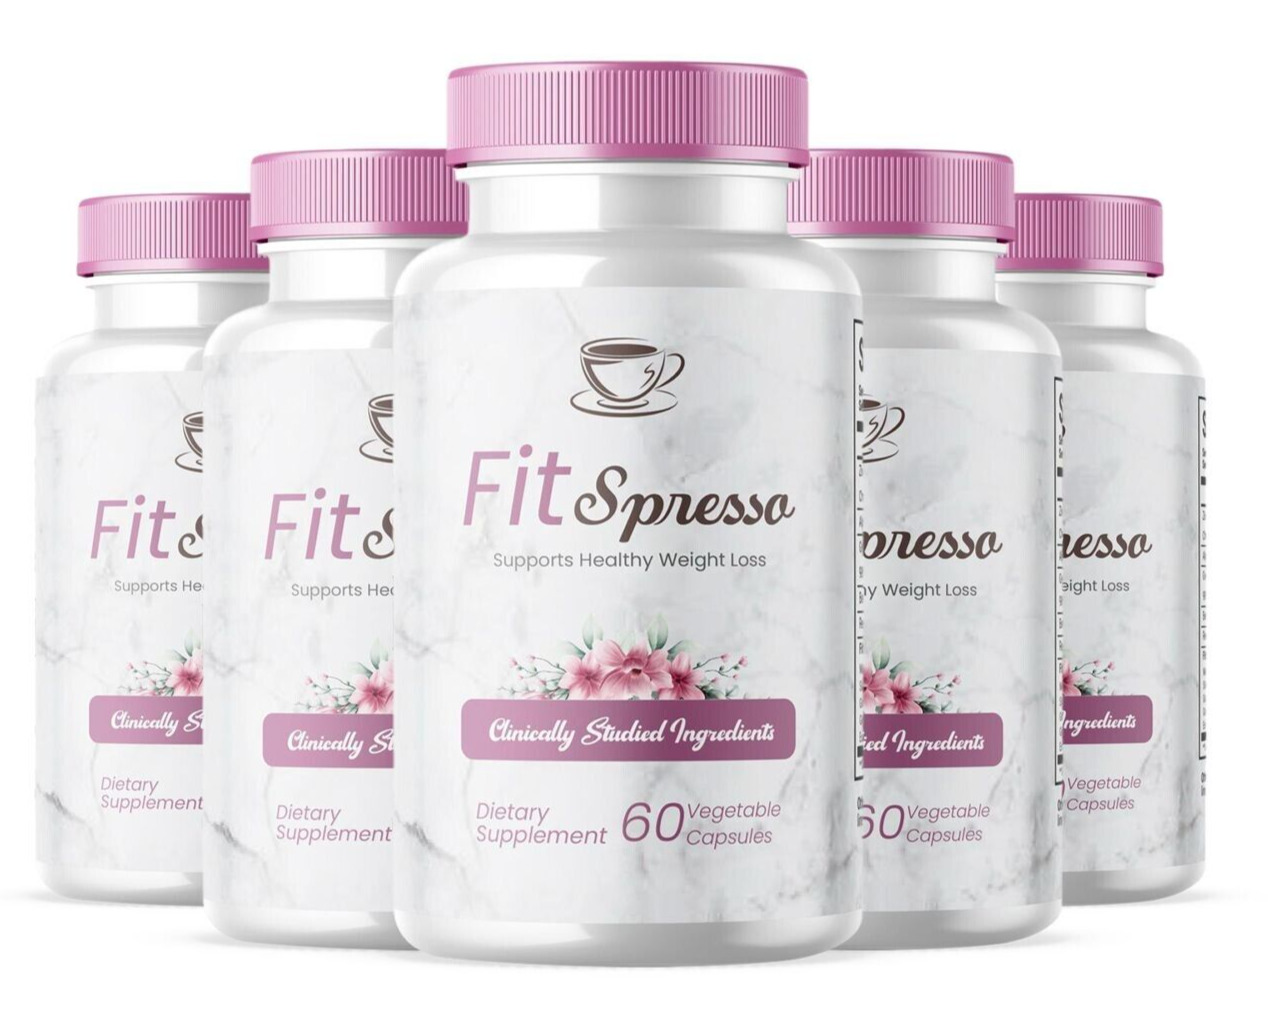 FitSpresso Health Support Supplement- Fit Spresso new Sealed Fast Ship (5 PACK)